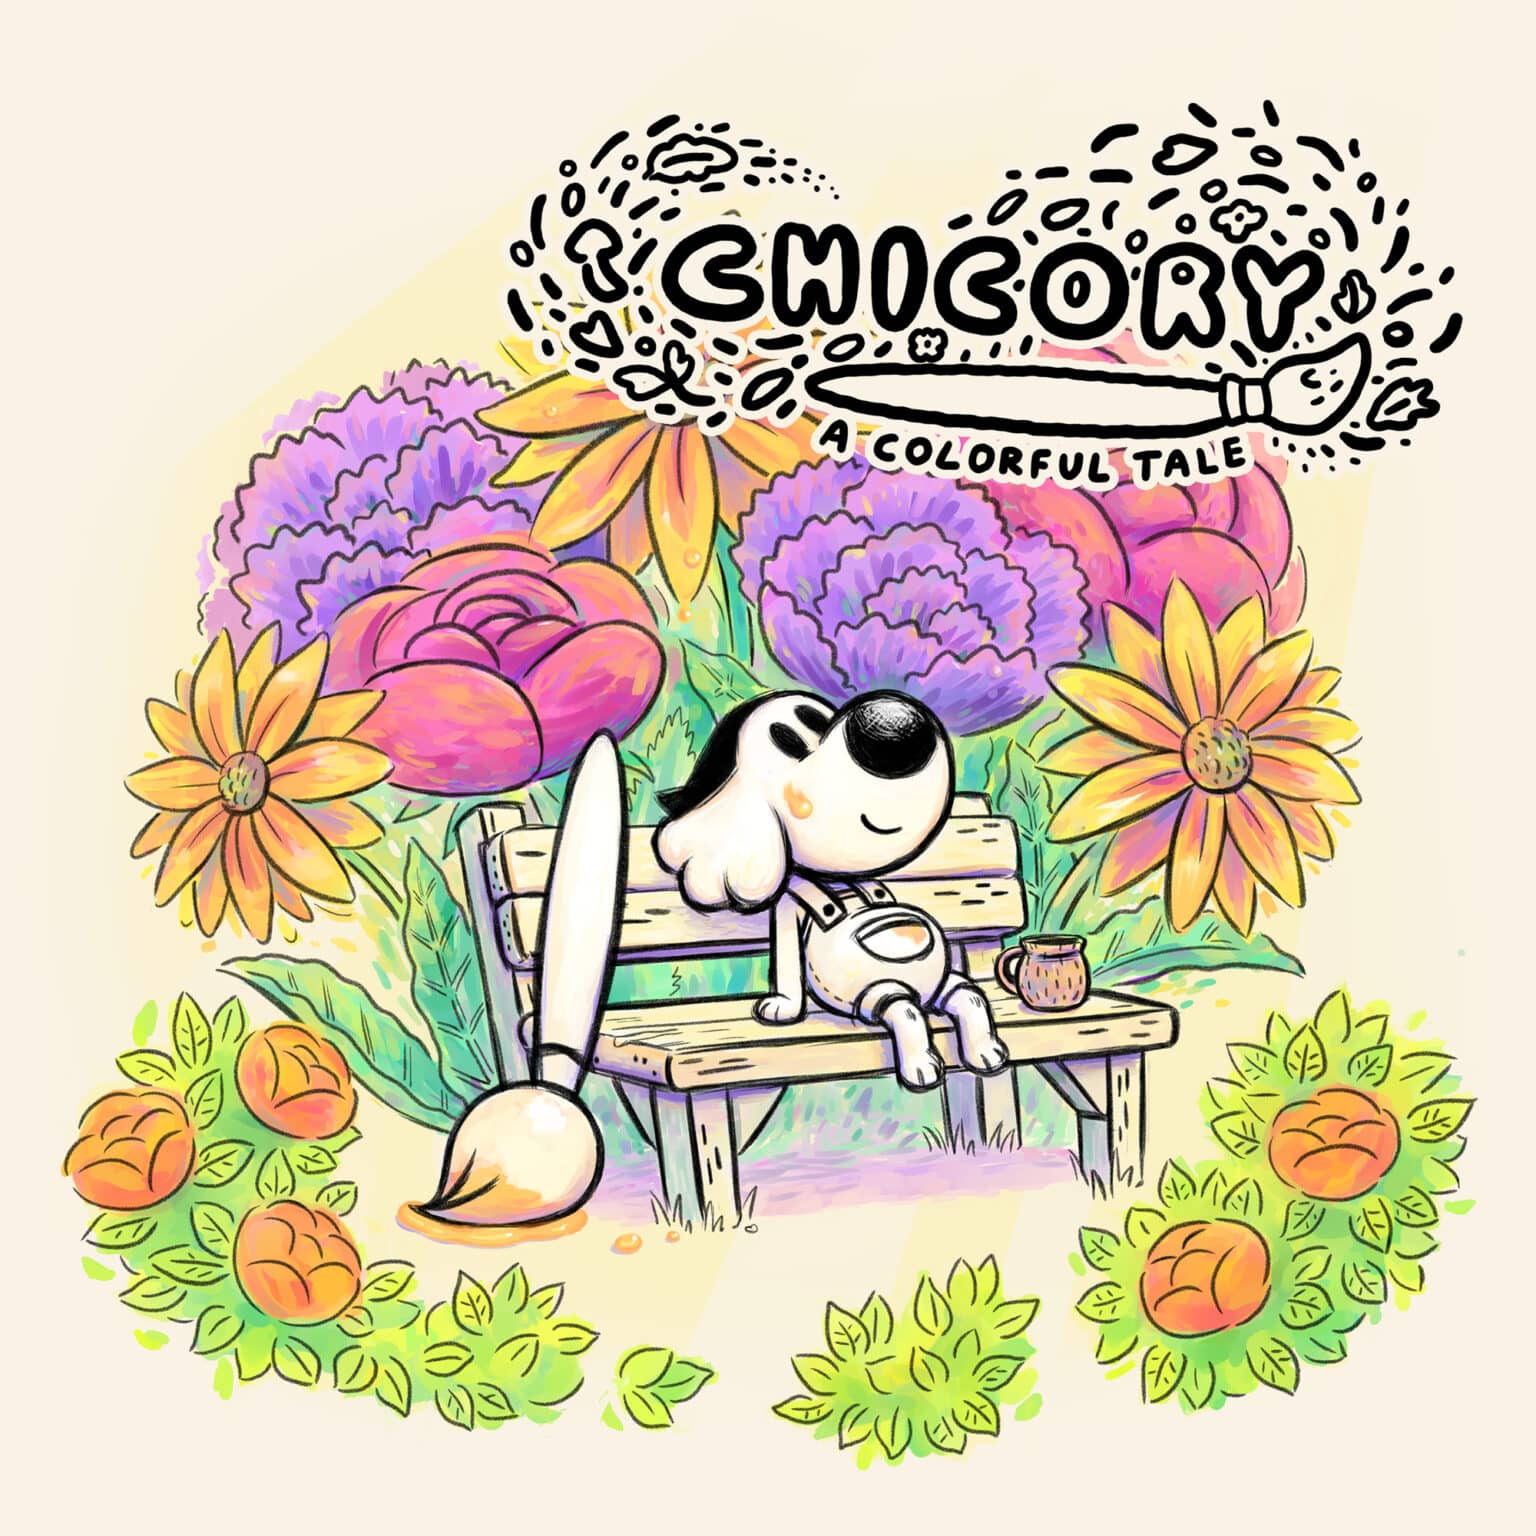 chicory a colorful tale steam